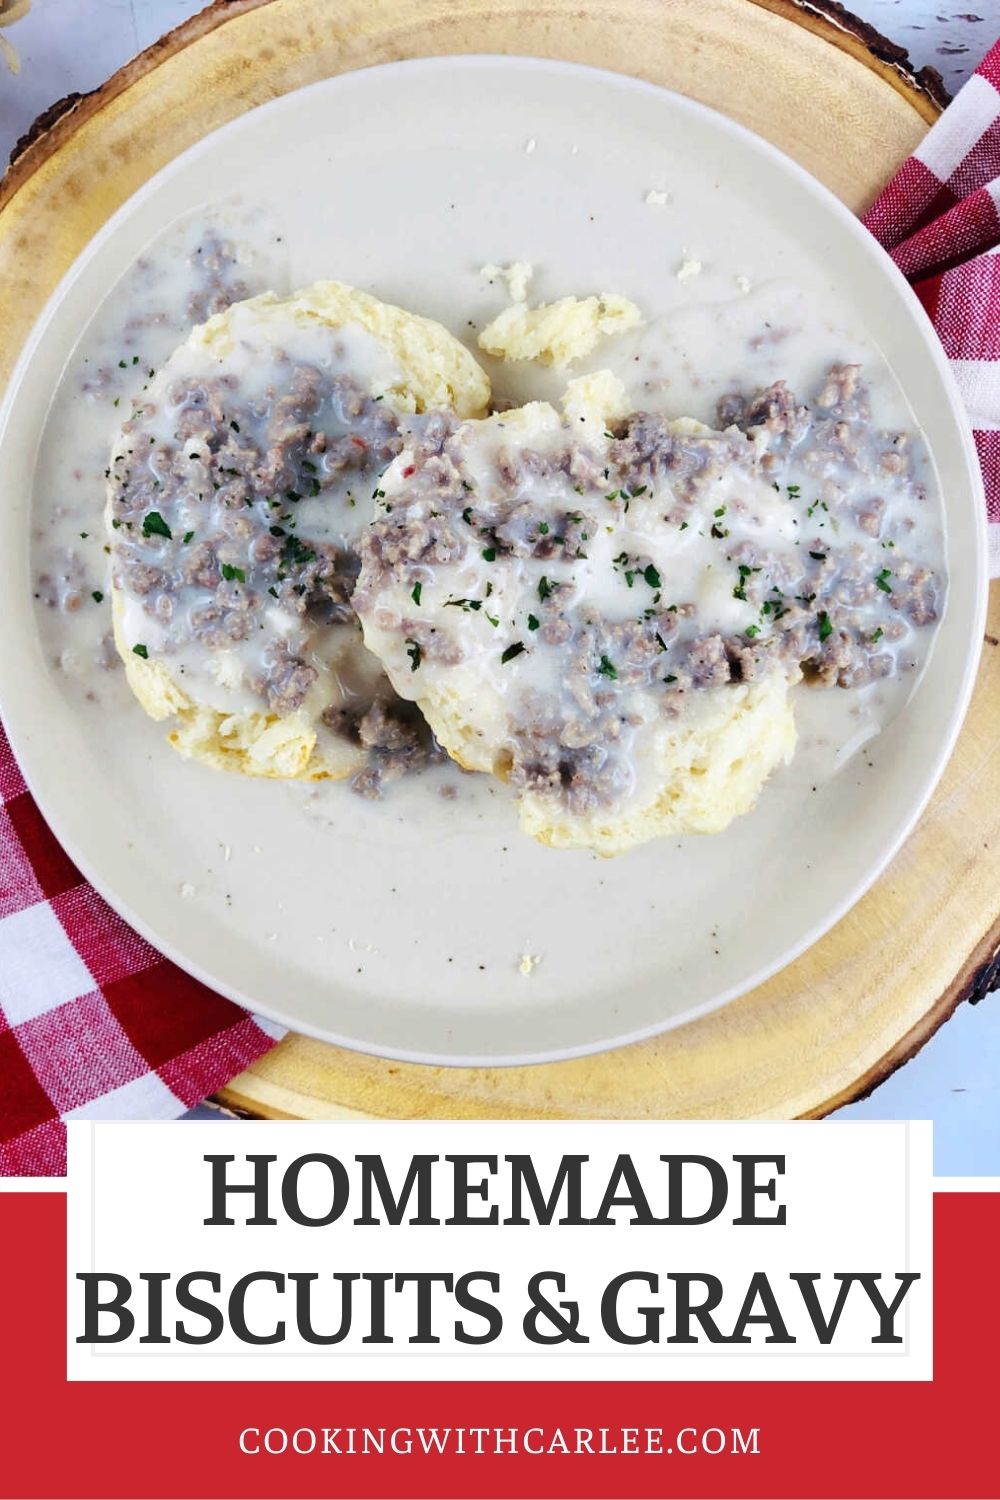 Homemade biscuits and sausage gravy is the ultimate in hearty comfort food breakfasts. Making fluffy biscuits and an easy creamy sawmill gravy with bits of breakfast sausage is easy and the results are delicious and filling.